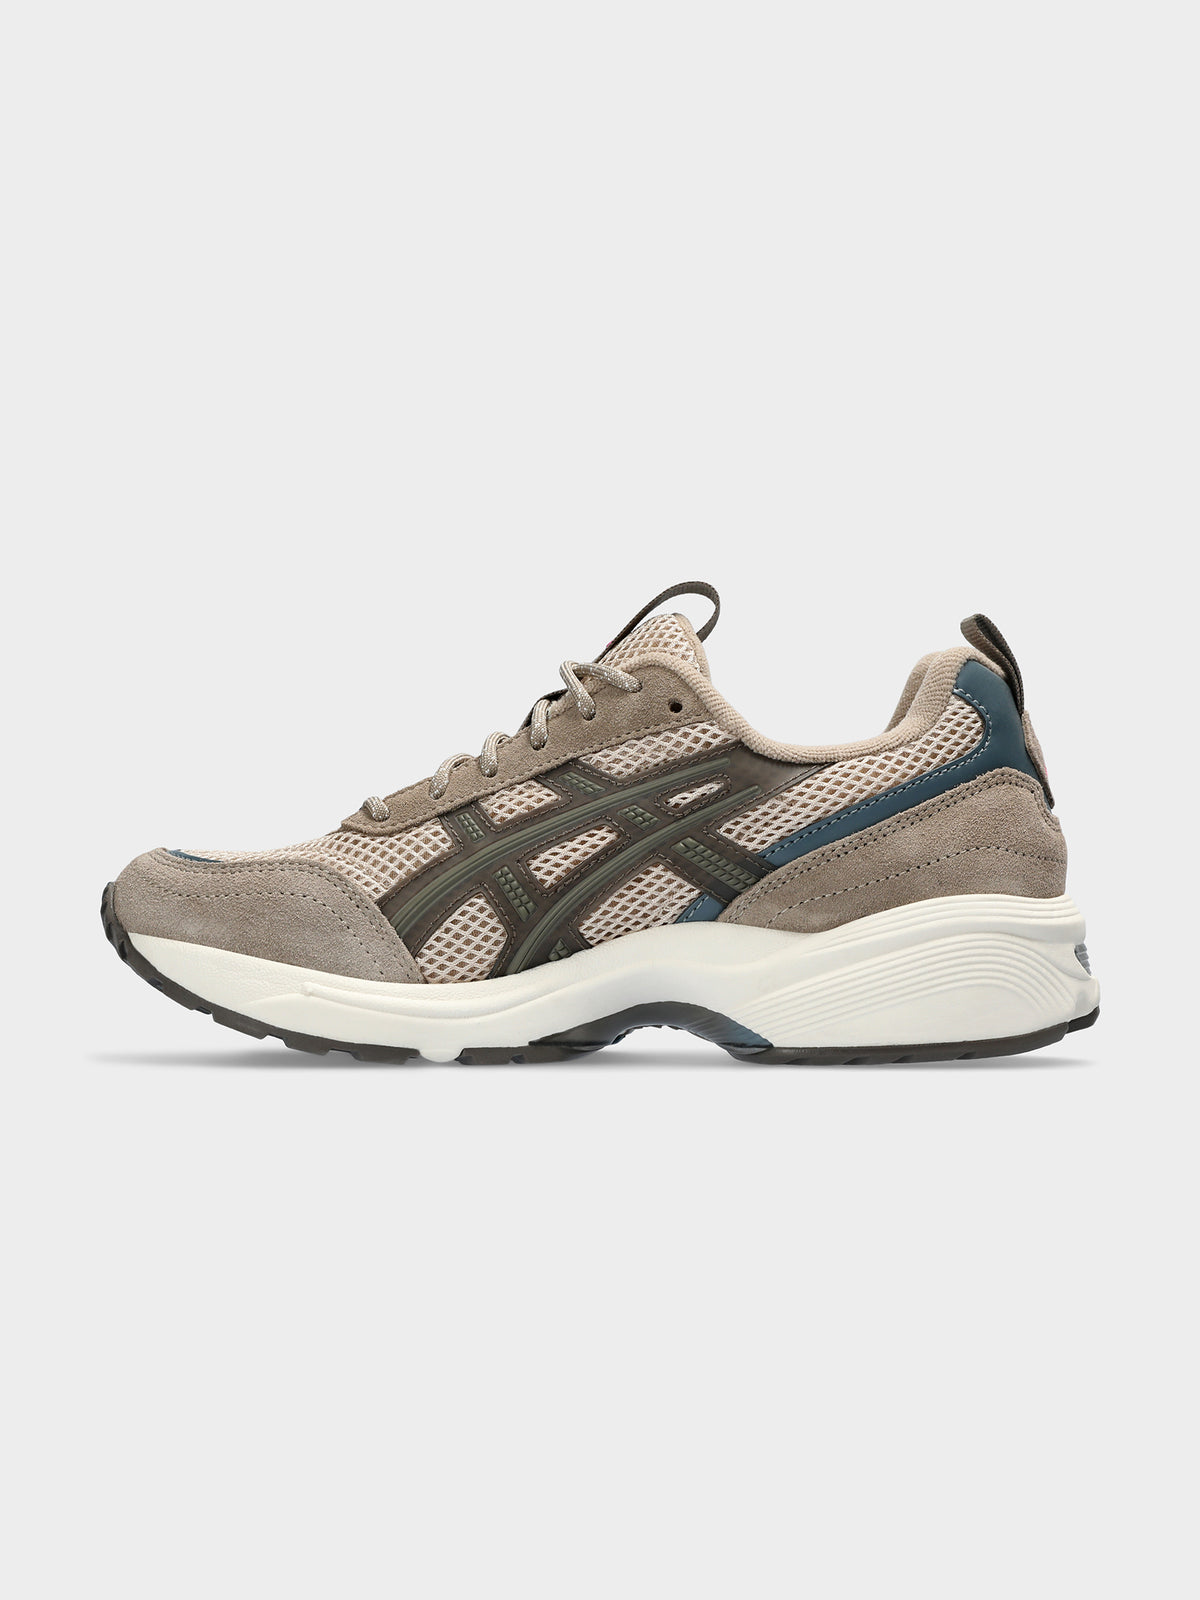 Womens Gel-1090 V2 Sneakers in Simply Taupe &amp; Dark Taupe